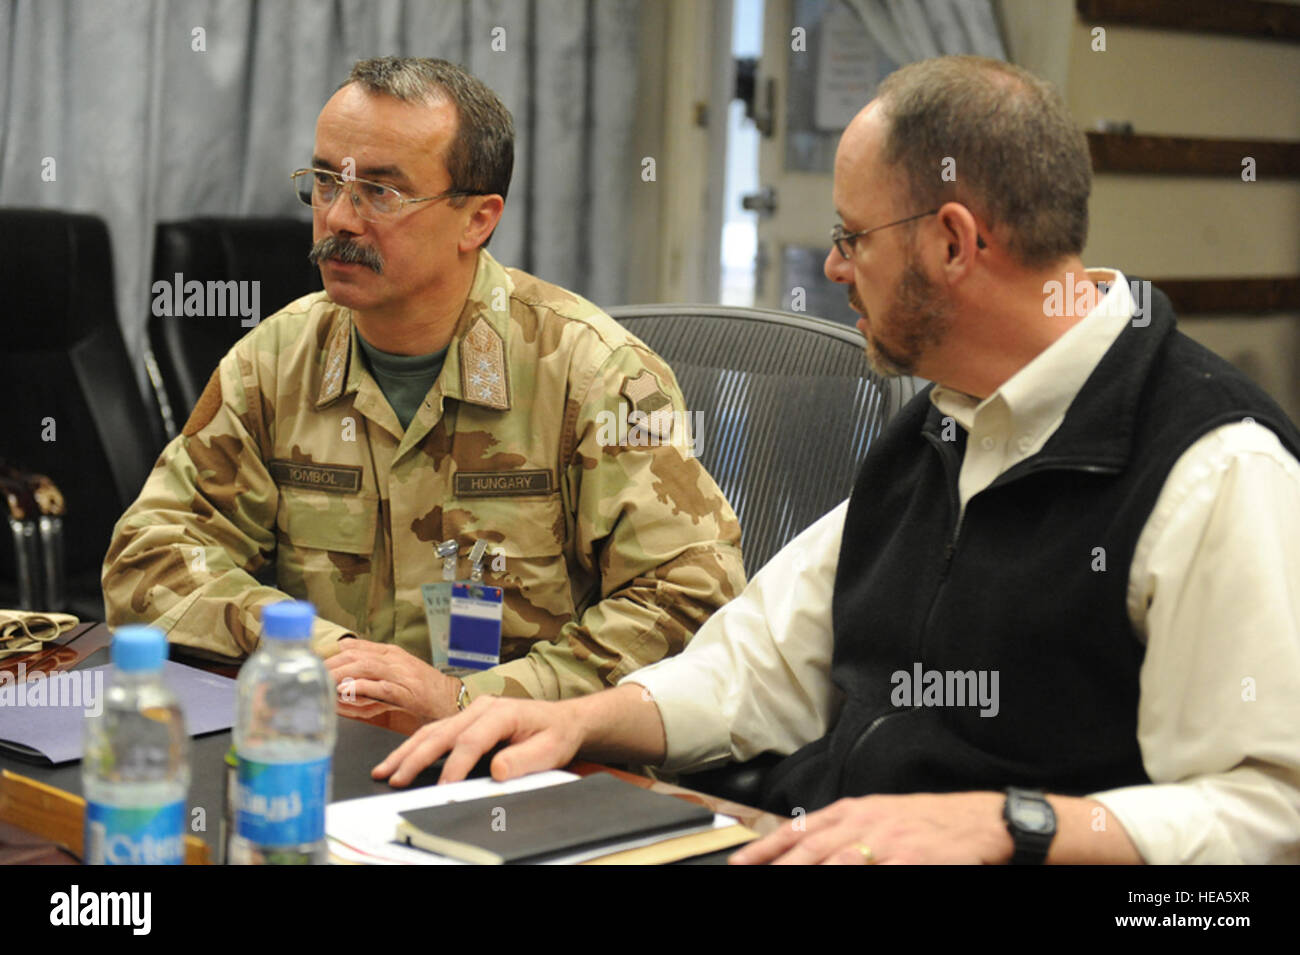 100516-F-5561D-002 Kabul - Hungarian Chief of Staff Gen. Laszlo Tombol meets Dr. Jack D. Kem, Deputy to the Commander, NATO Training Mission - Afghanistan (NTM-A) / Combined Security Transition Command - Afghanistan (CSTC-A) at Camp Eggers on May 16, 2010. Gen. Tombol visited Camp Eggers to attend an operations brief. Senior Airman Matt Davis) Stock Photo